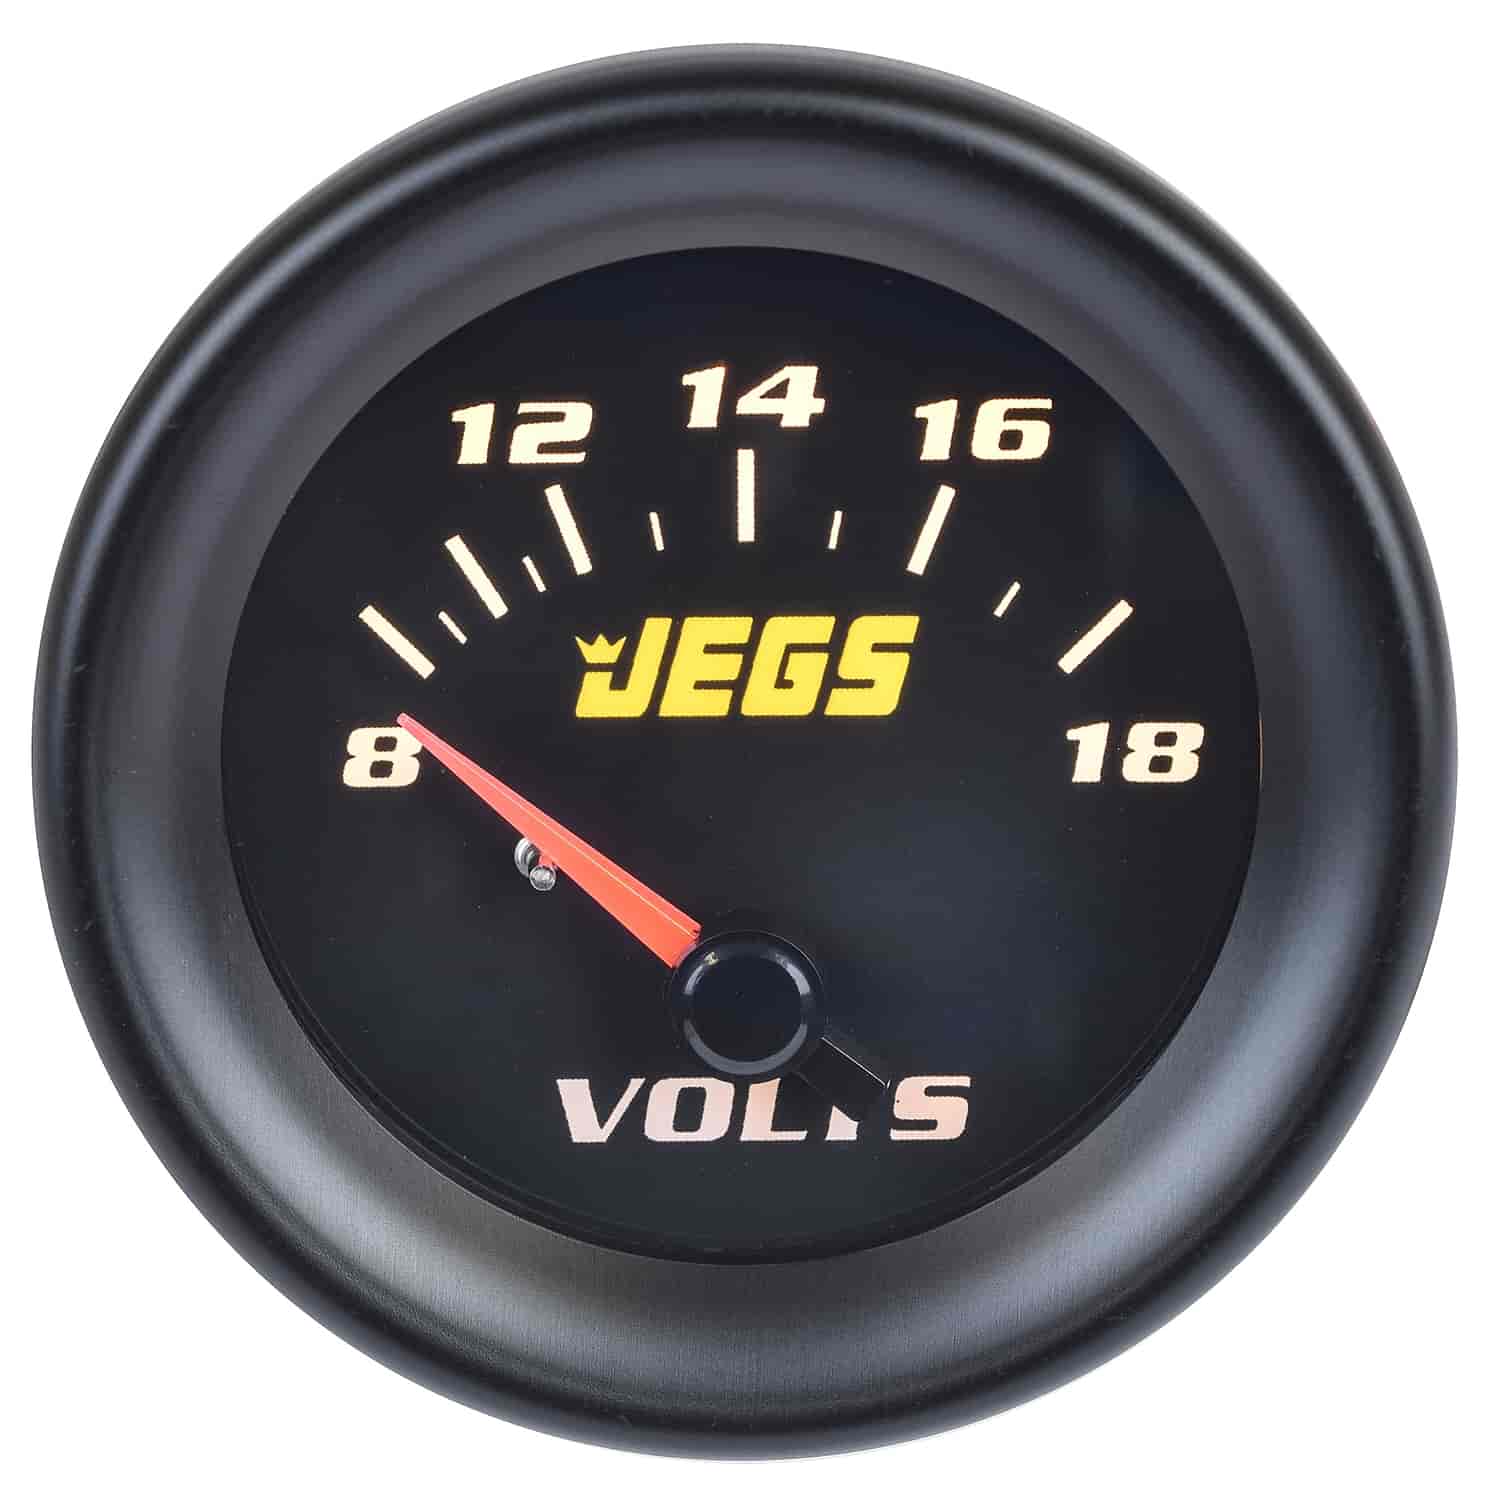 Voltmeter Gauge [2 1/16 in. Electrical, 8-18 Volts with Black Face]